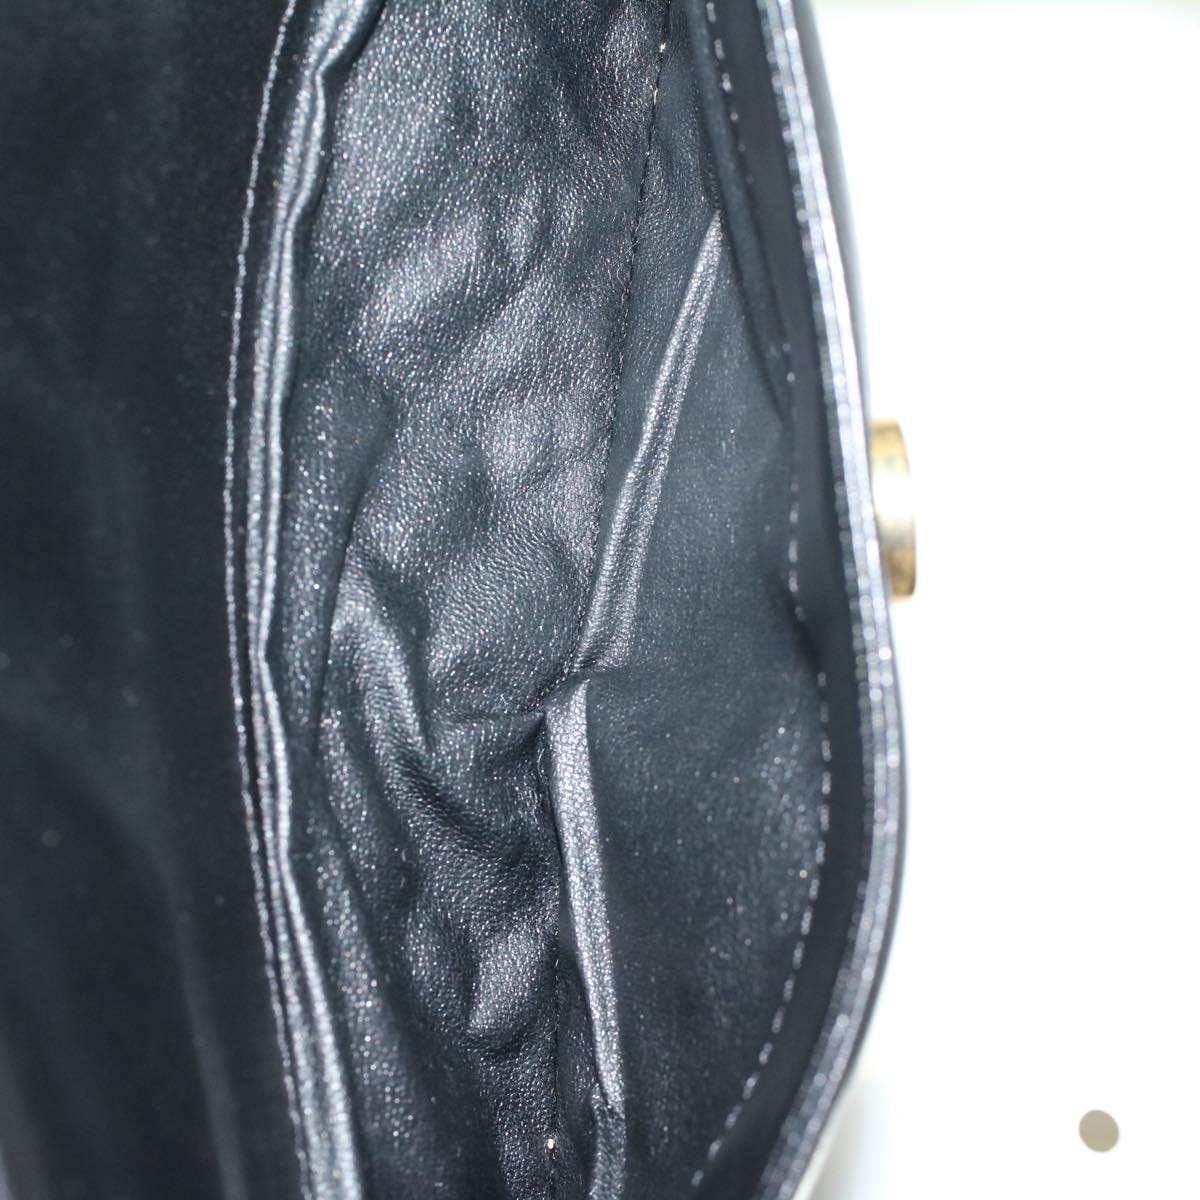 Givenchy Hand Bag Leather Black Auth Bs9526